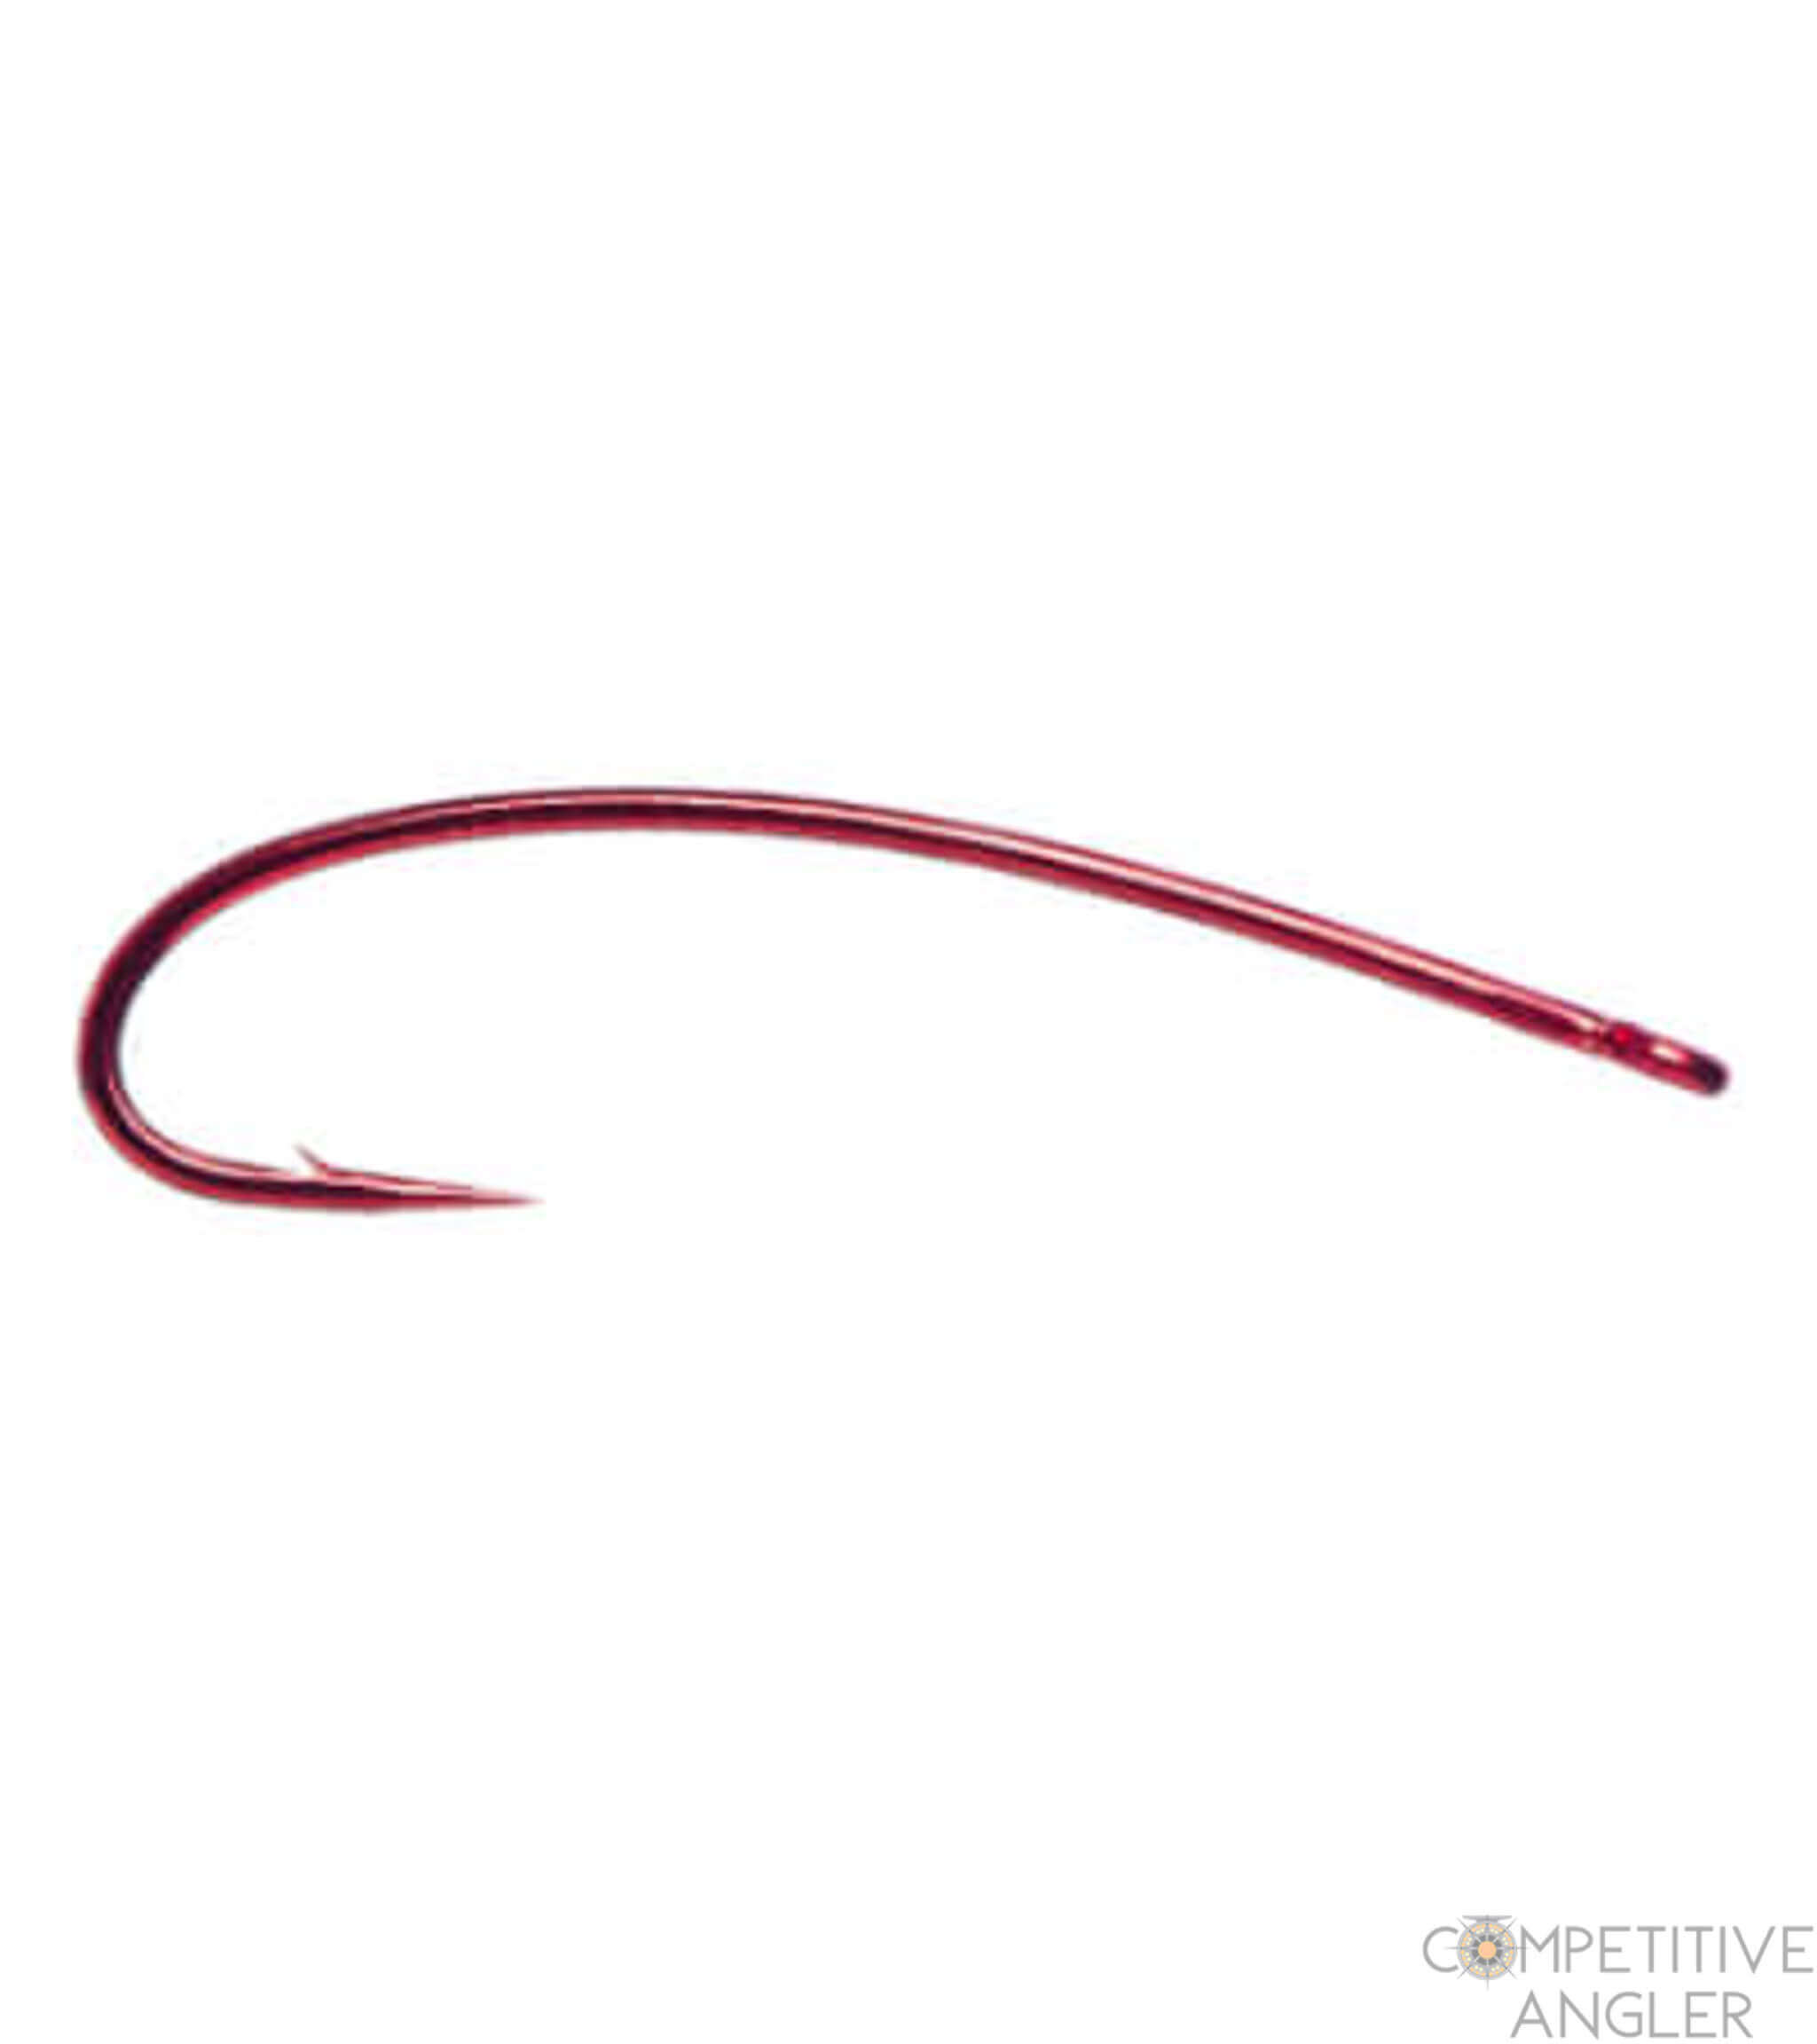 Daiichi 1273 Multi-Use Nymph Hook (Red Finish) - Competitive Angler